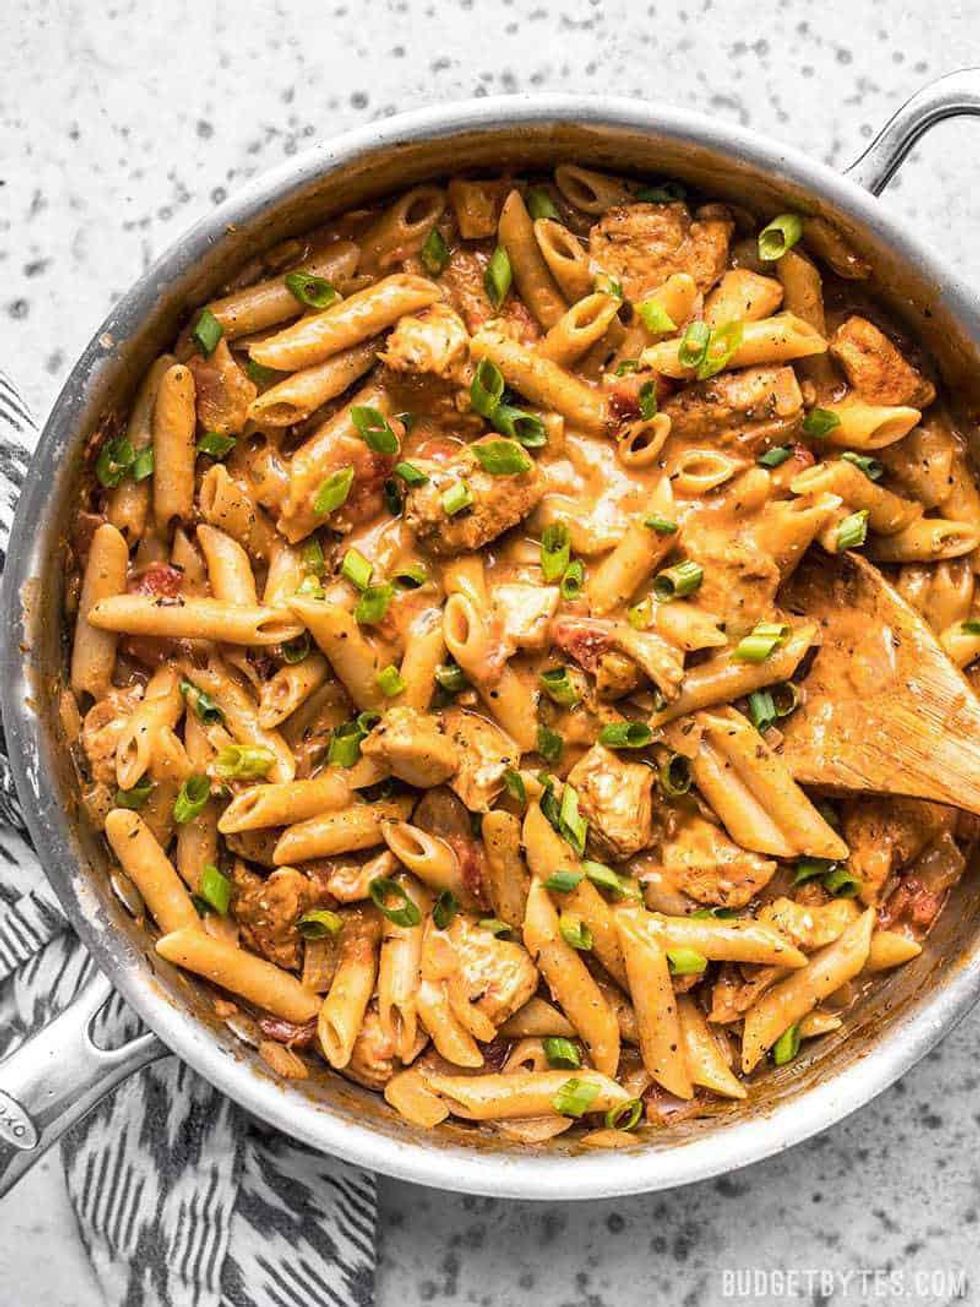 6 Pasta Recipes To Satisfy Your Carb Cravings